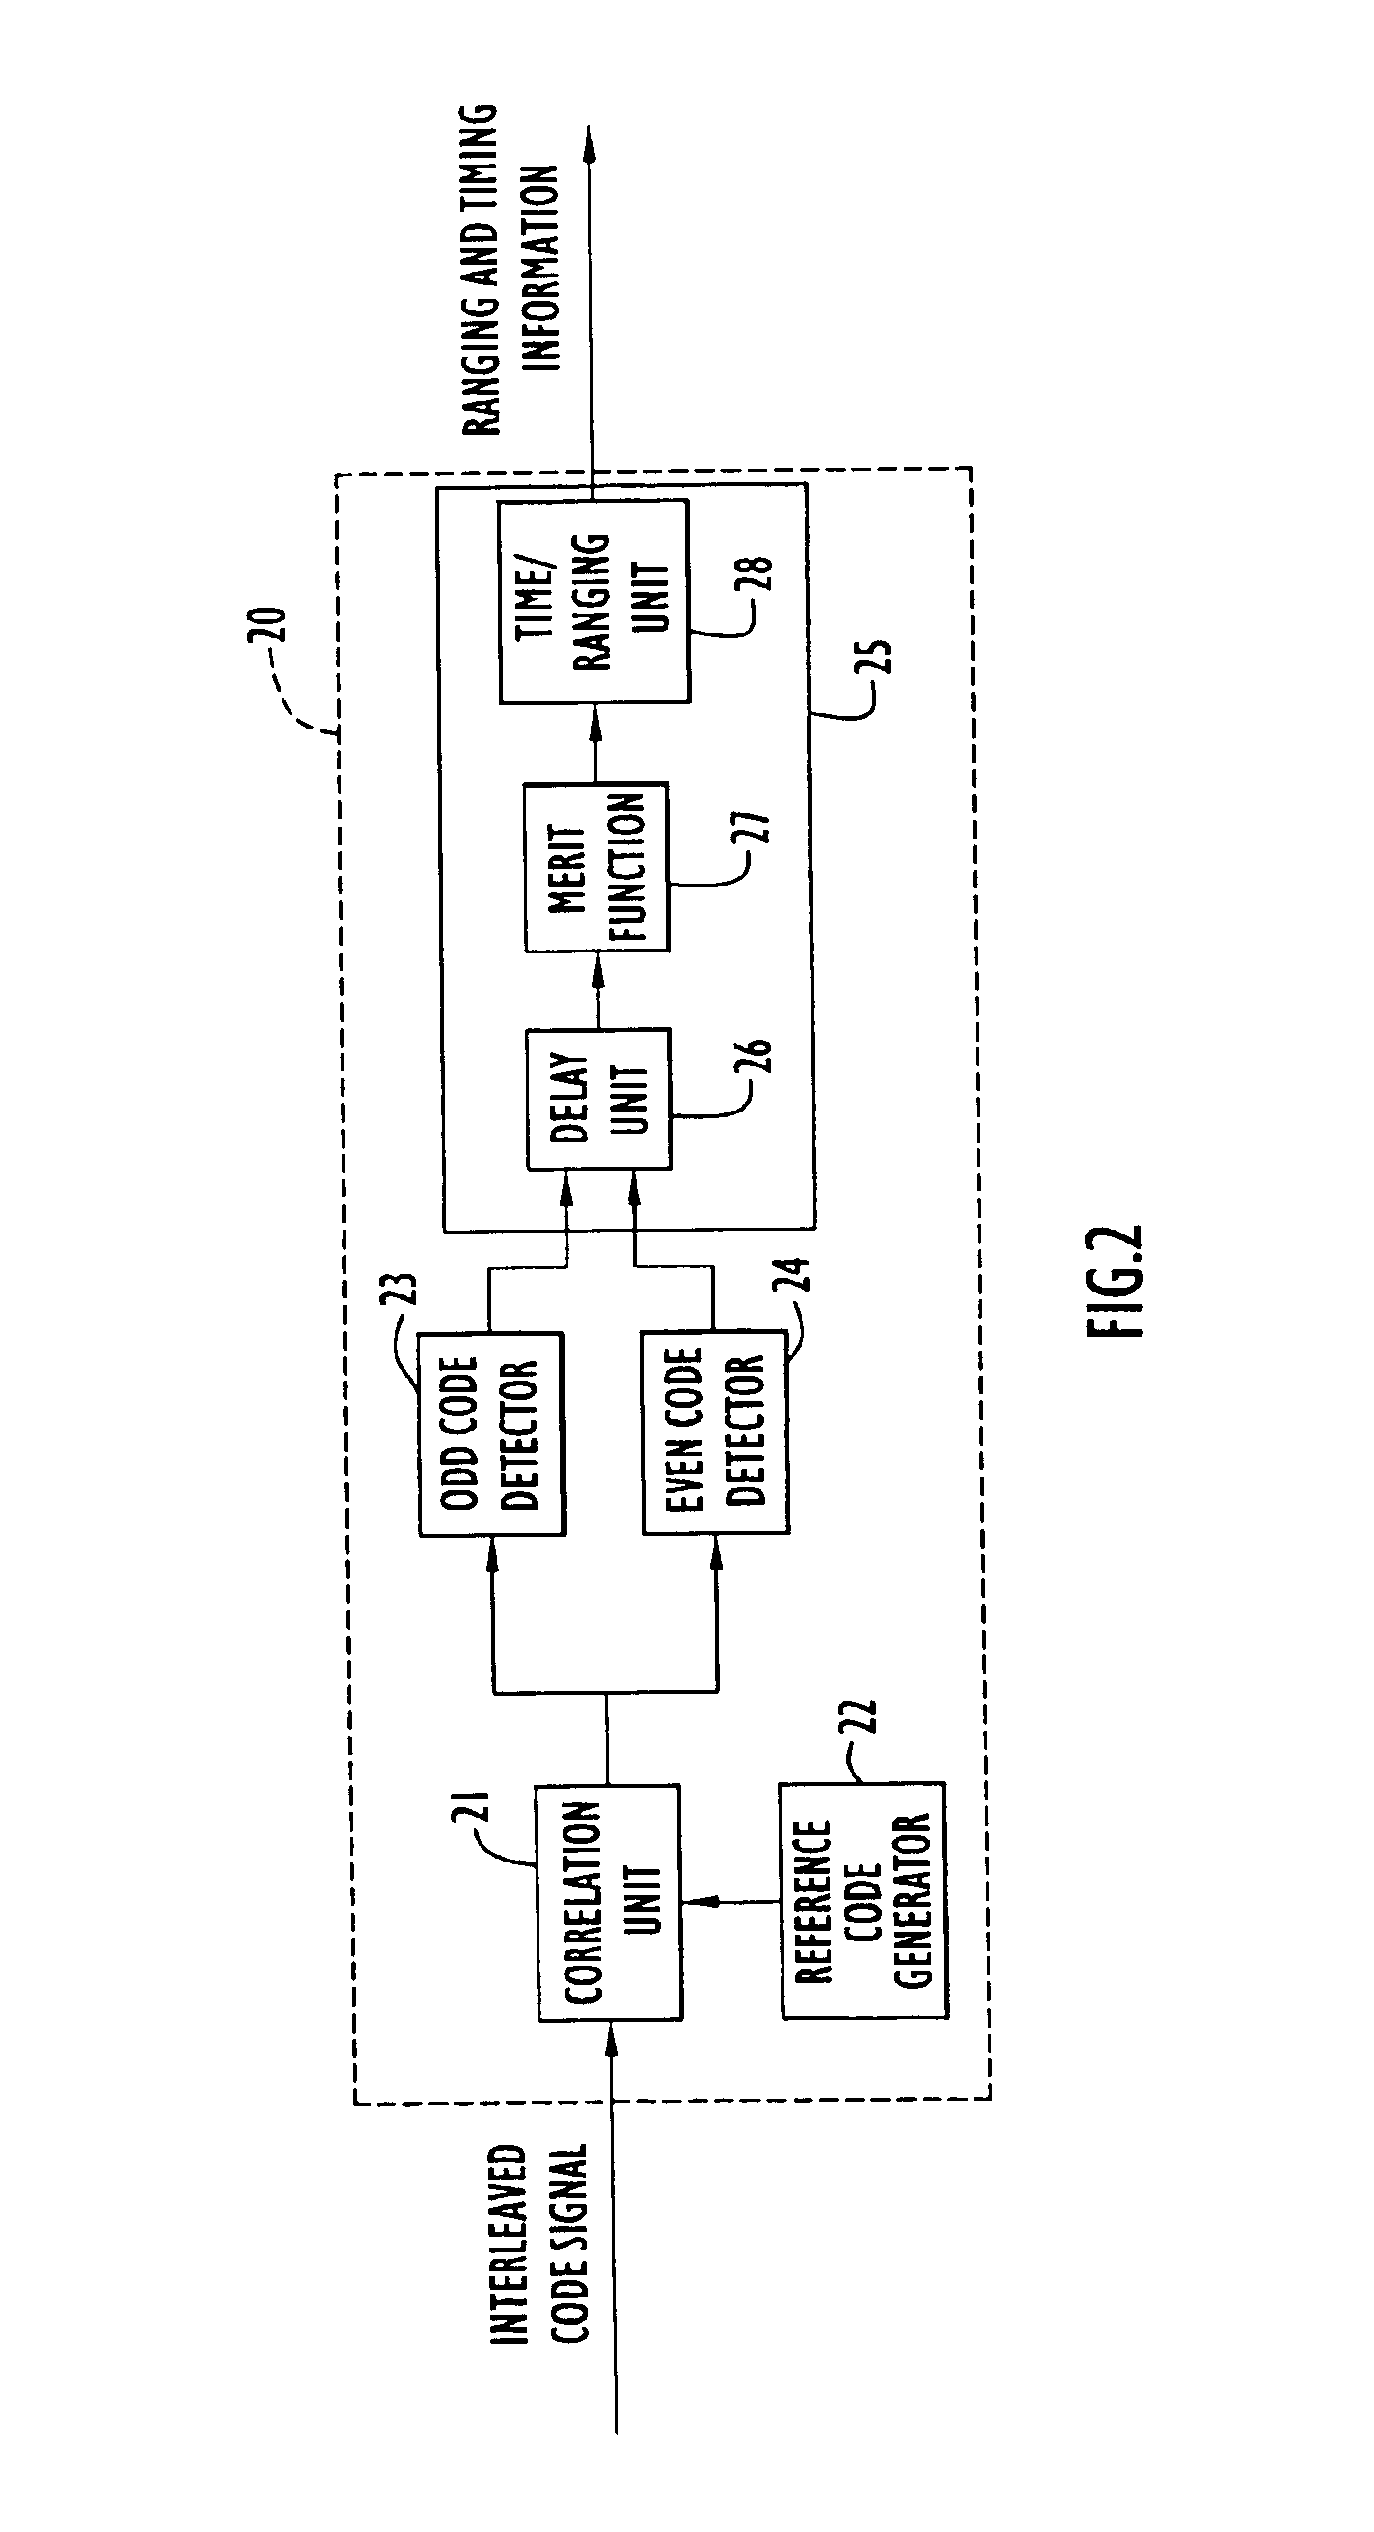 Method and apparatus for detecting an interleaved code